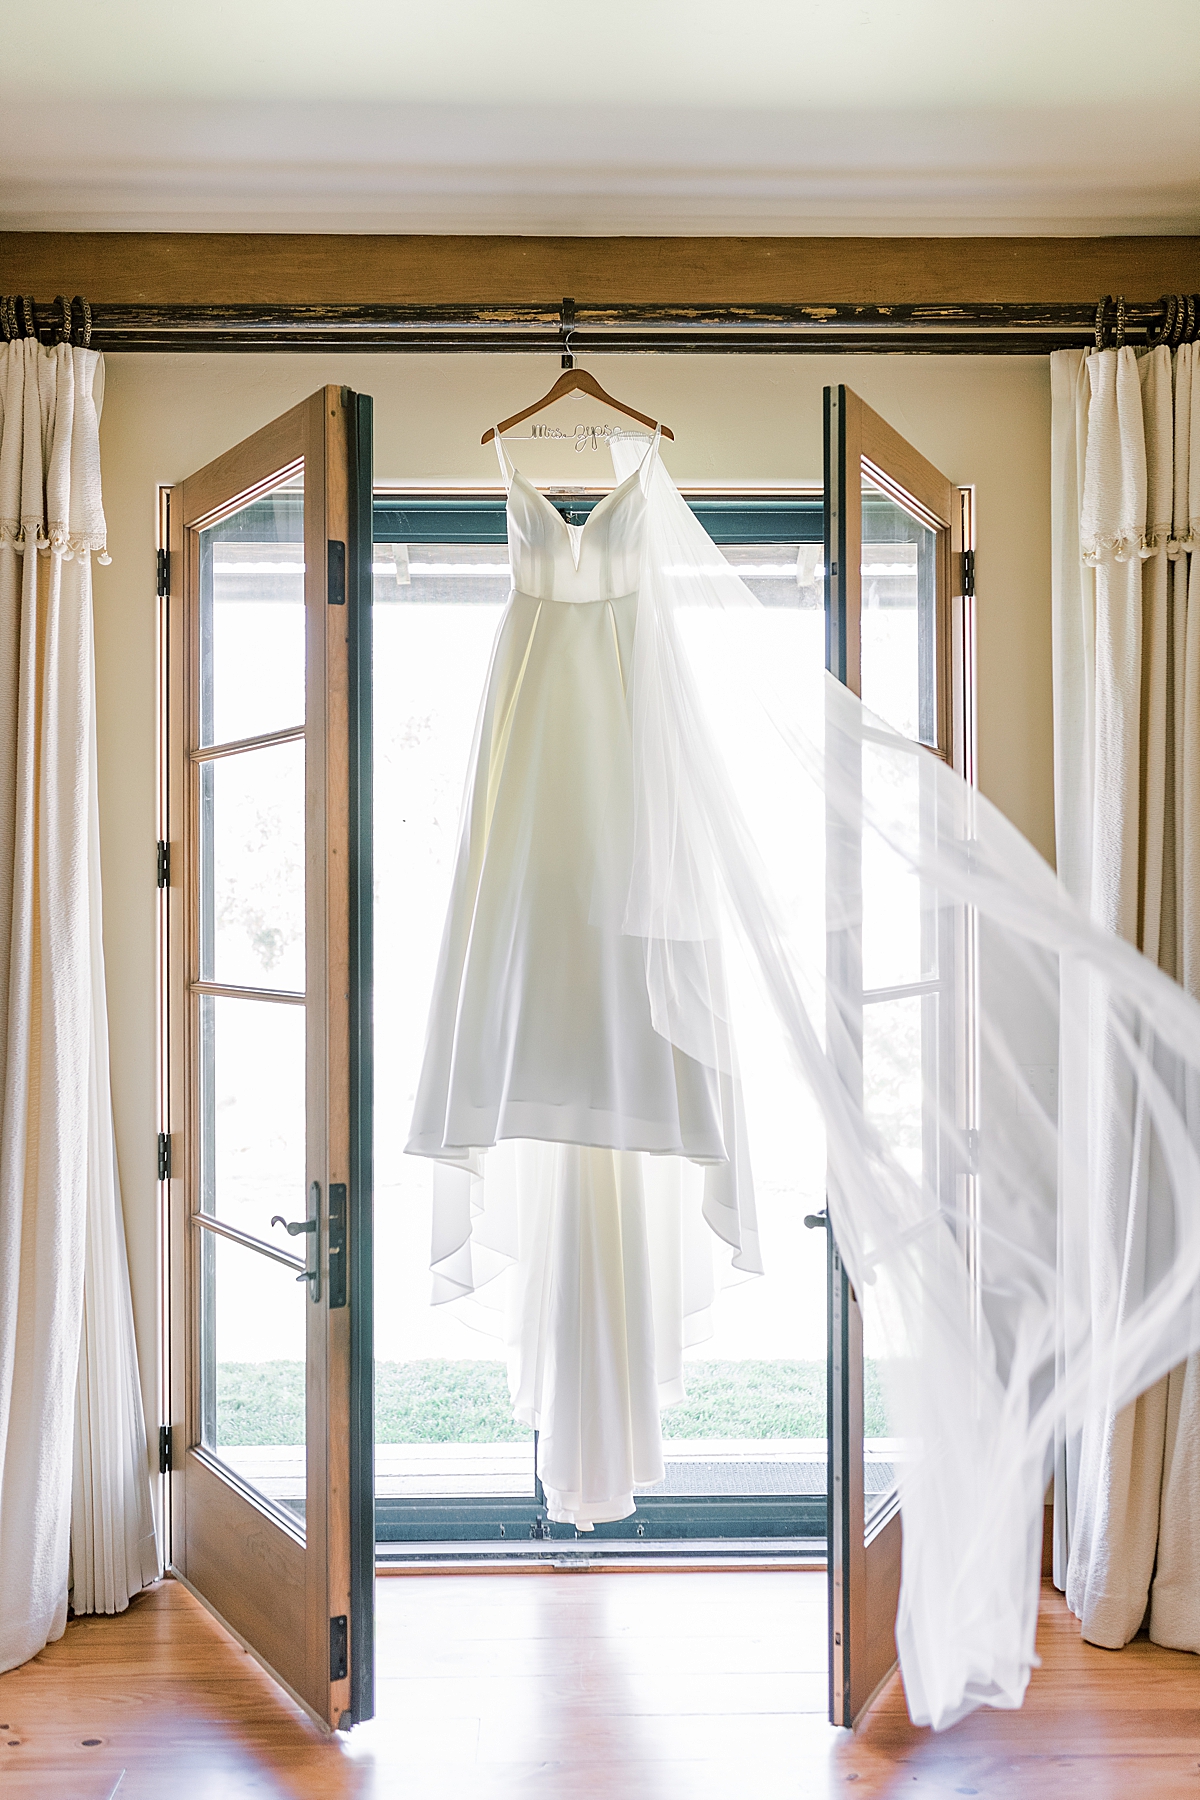 Kat's wedding dress hanging from a bar and blowing in the wind at their San Luis Obispo Mission wedding venue.